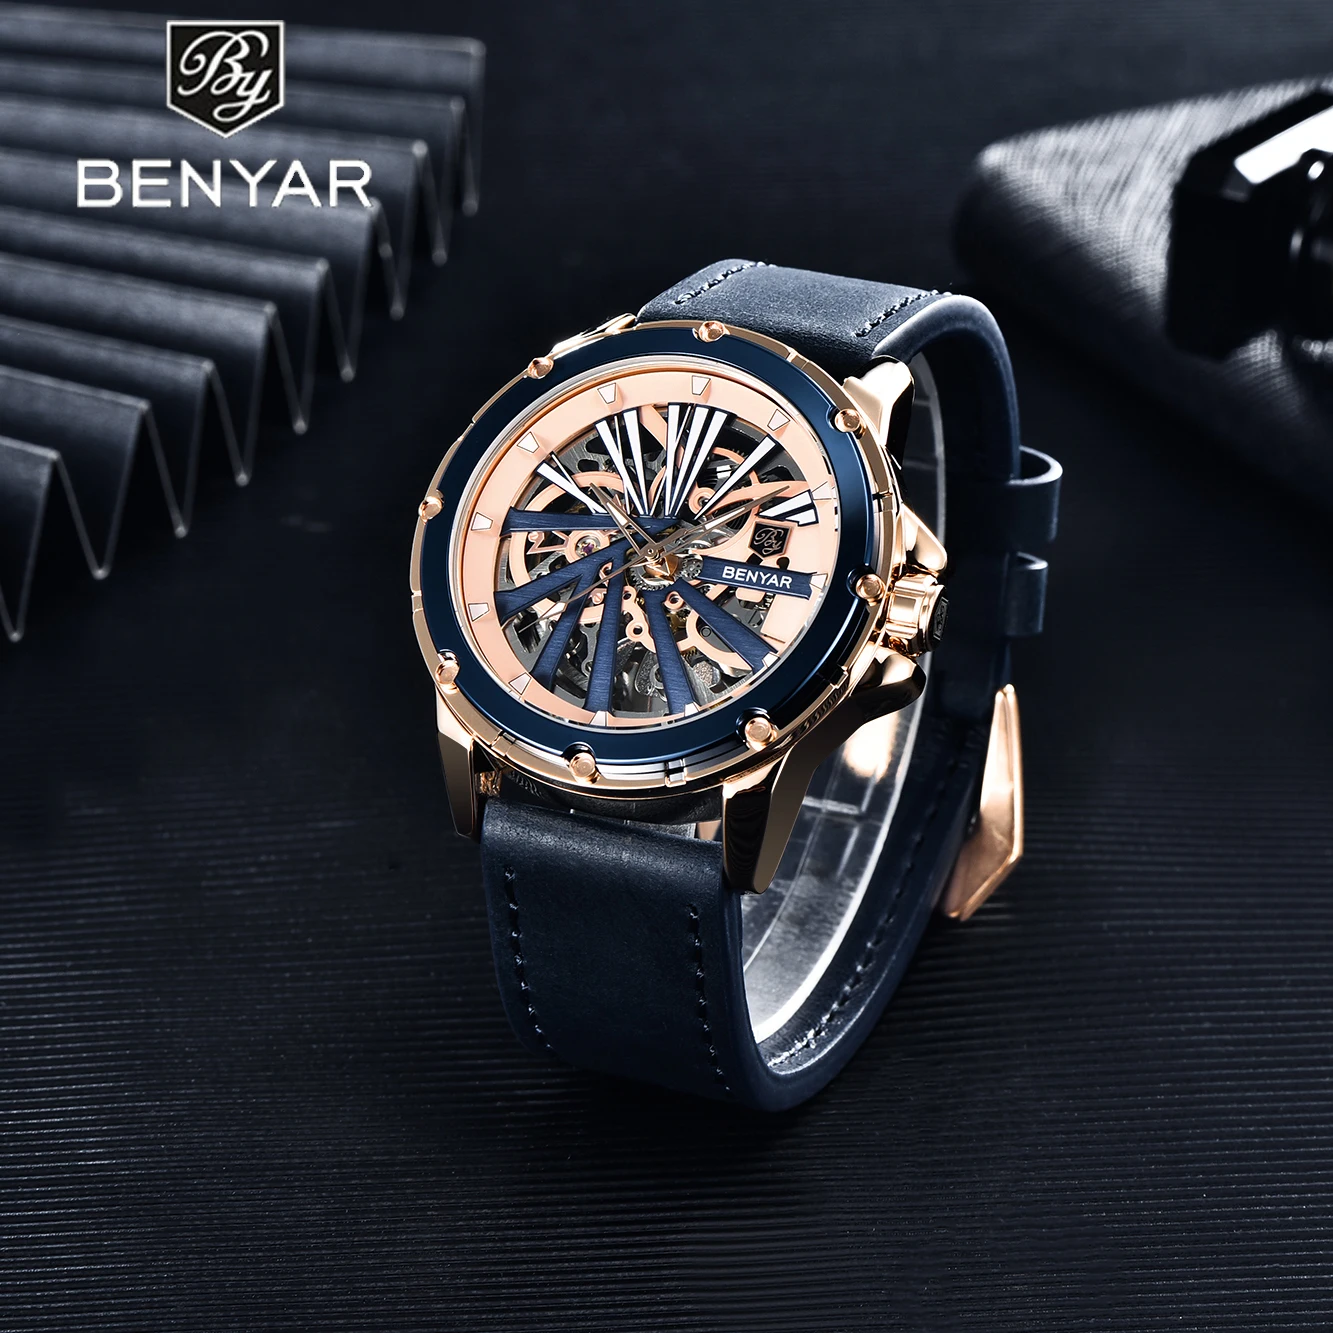 Benyar 2021 New Top Brand Luxury Men's Automatic Mechanical Watch Leather Waterproof Double-sided Hollow Design Watches Relogio